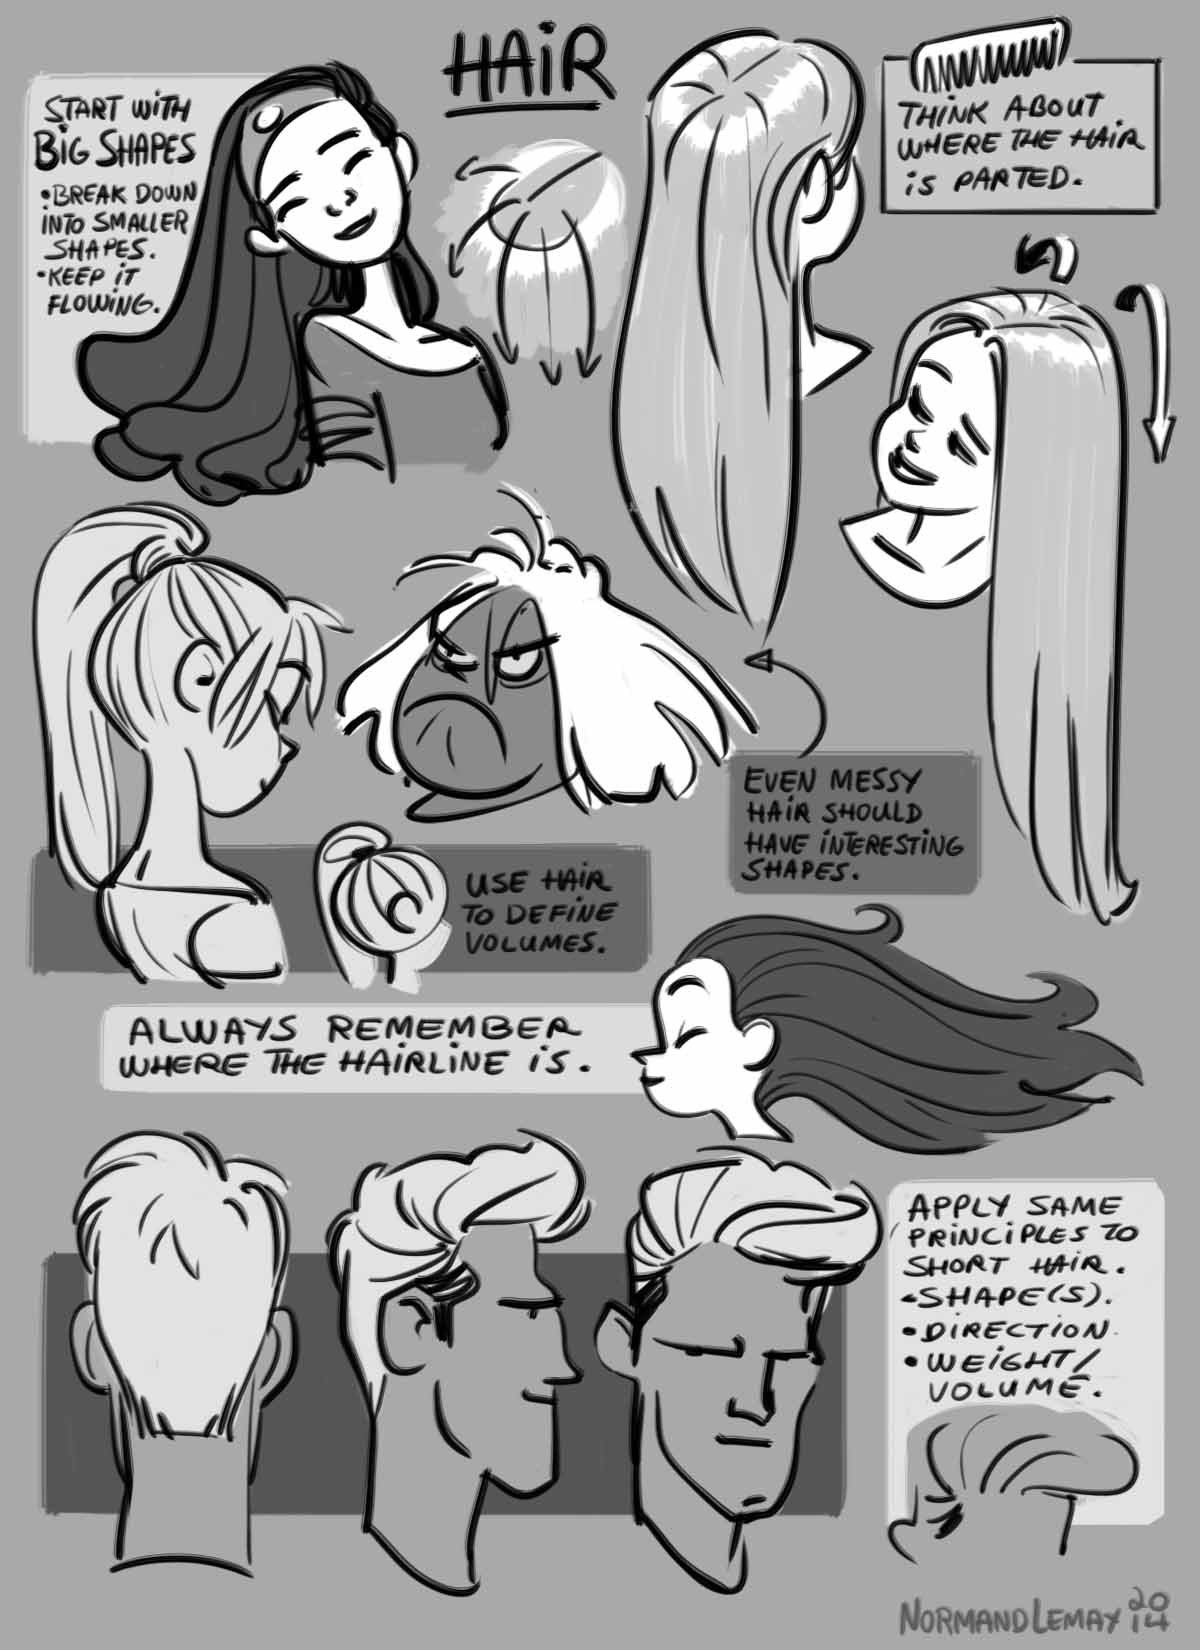 Griz & Norm's Hair Tuesday Tip illustrating hair shape, weight, and volume on female and male characters